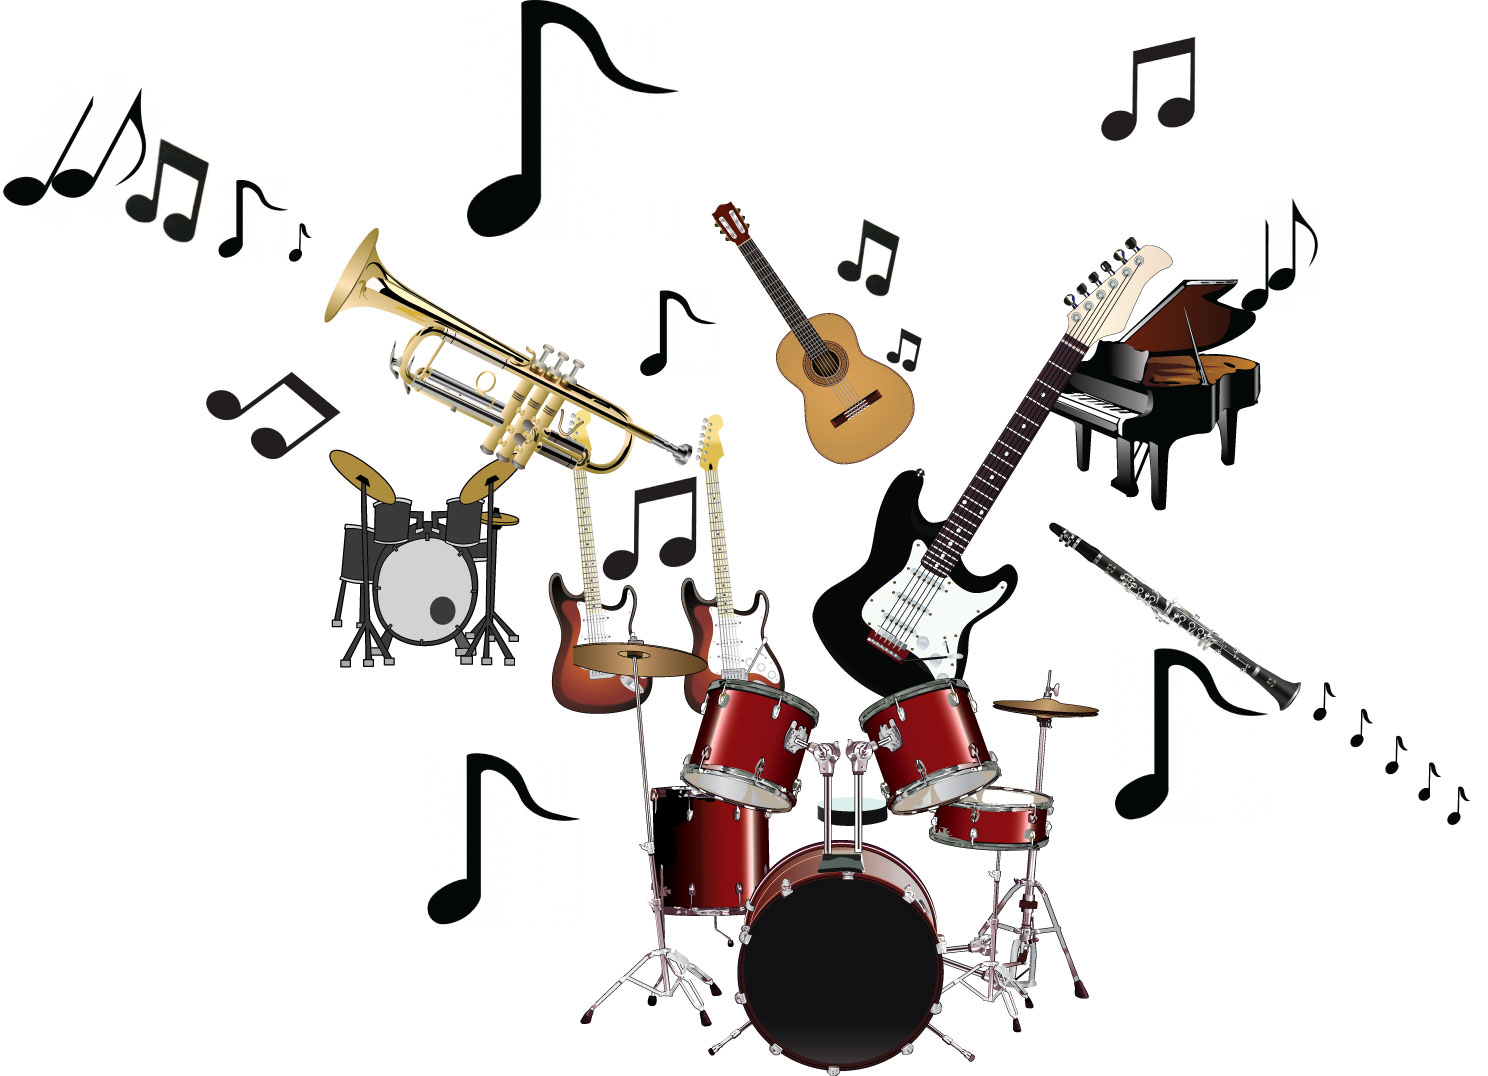 11 Download Free Music Vector Images